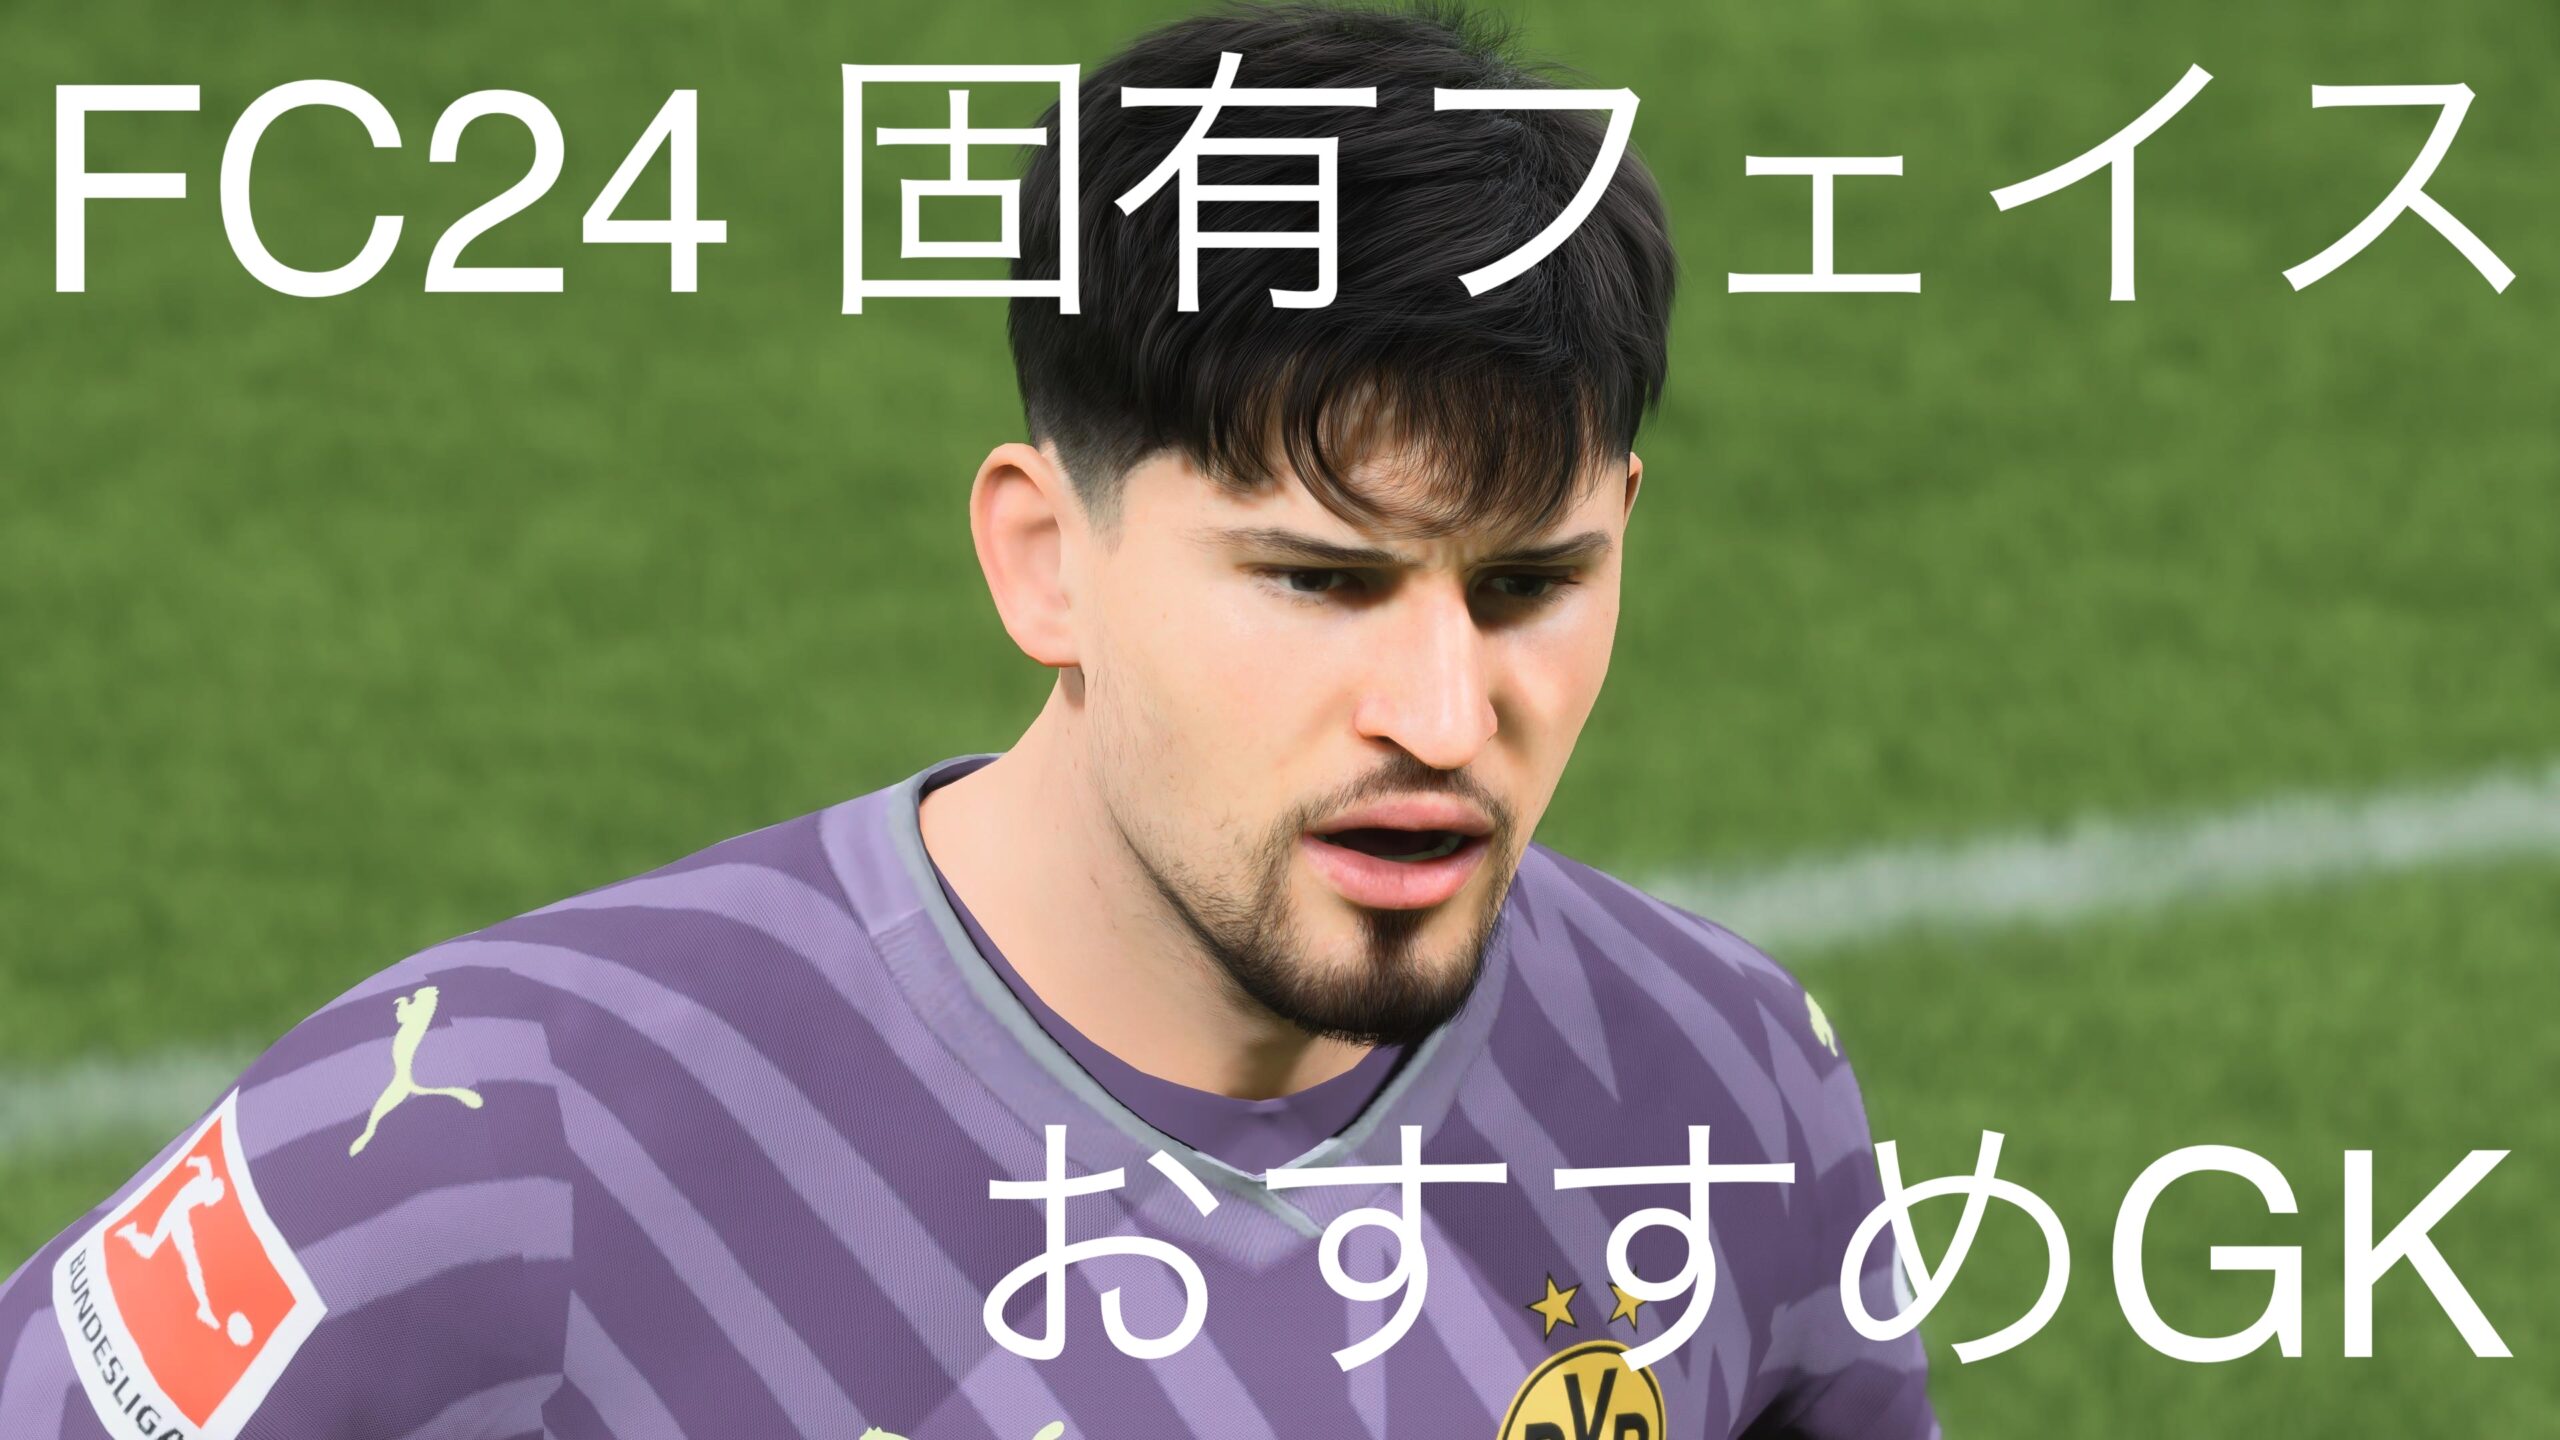 fc24 gk real face